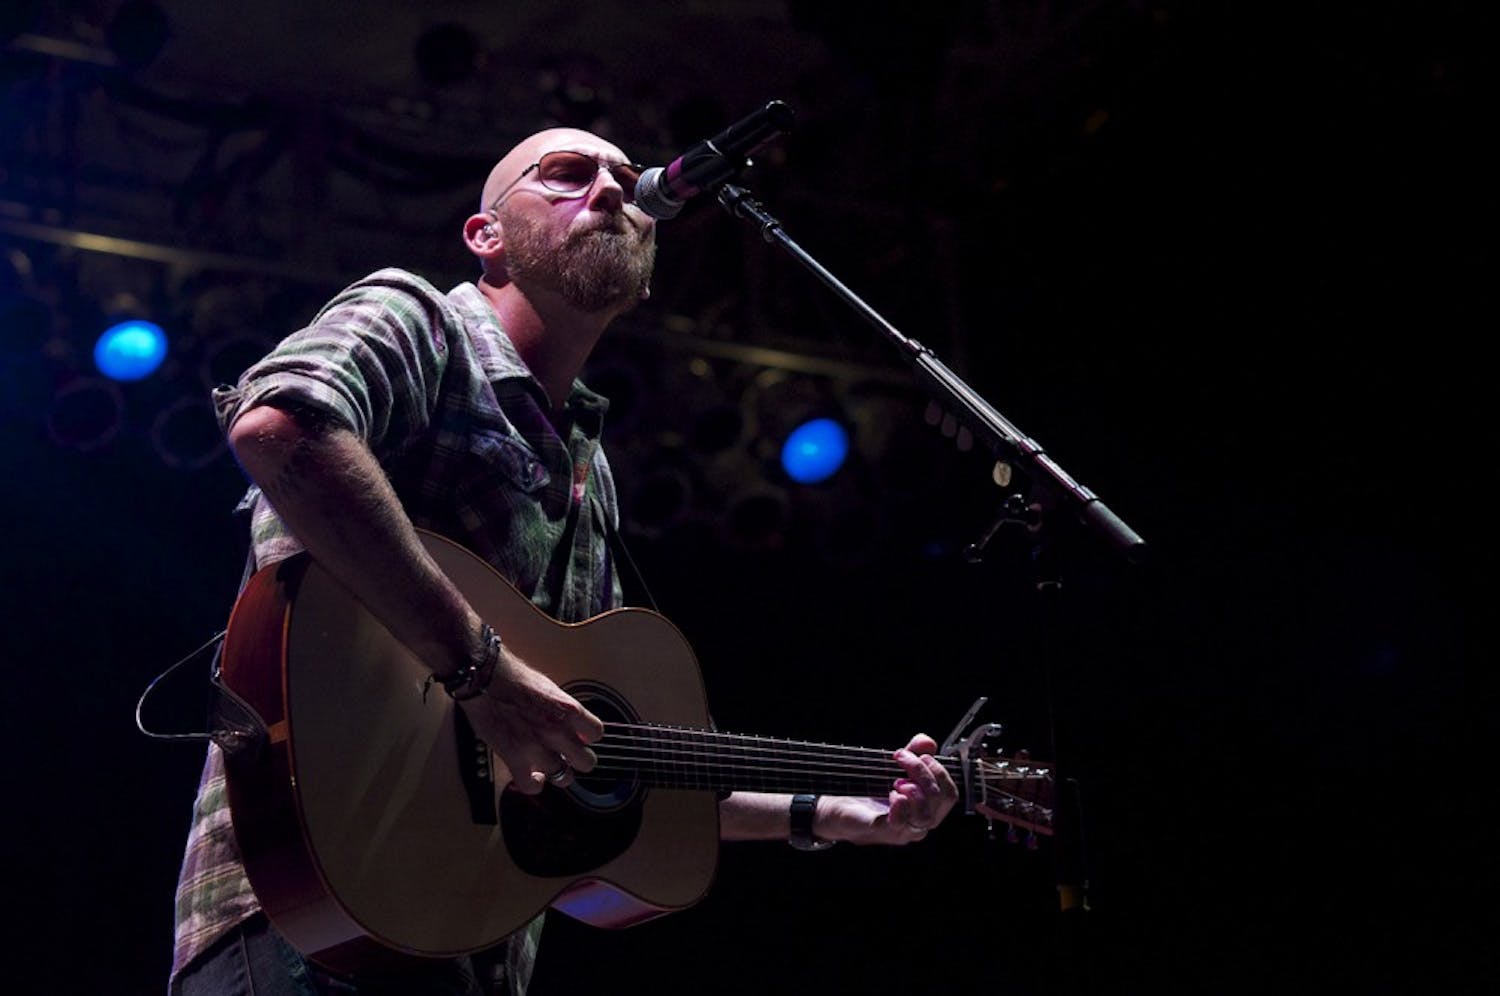 	Georgia alumnus and country singer Corey Smith performs a free show during the fair, appropriately starting the show with his song “Carolina.”